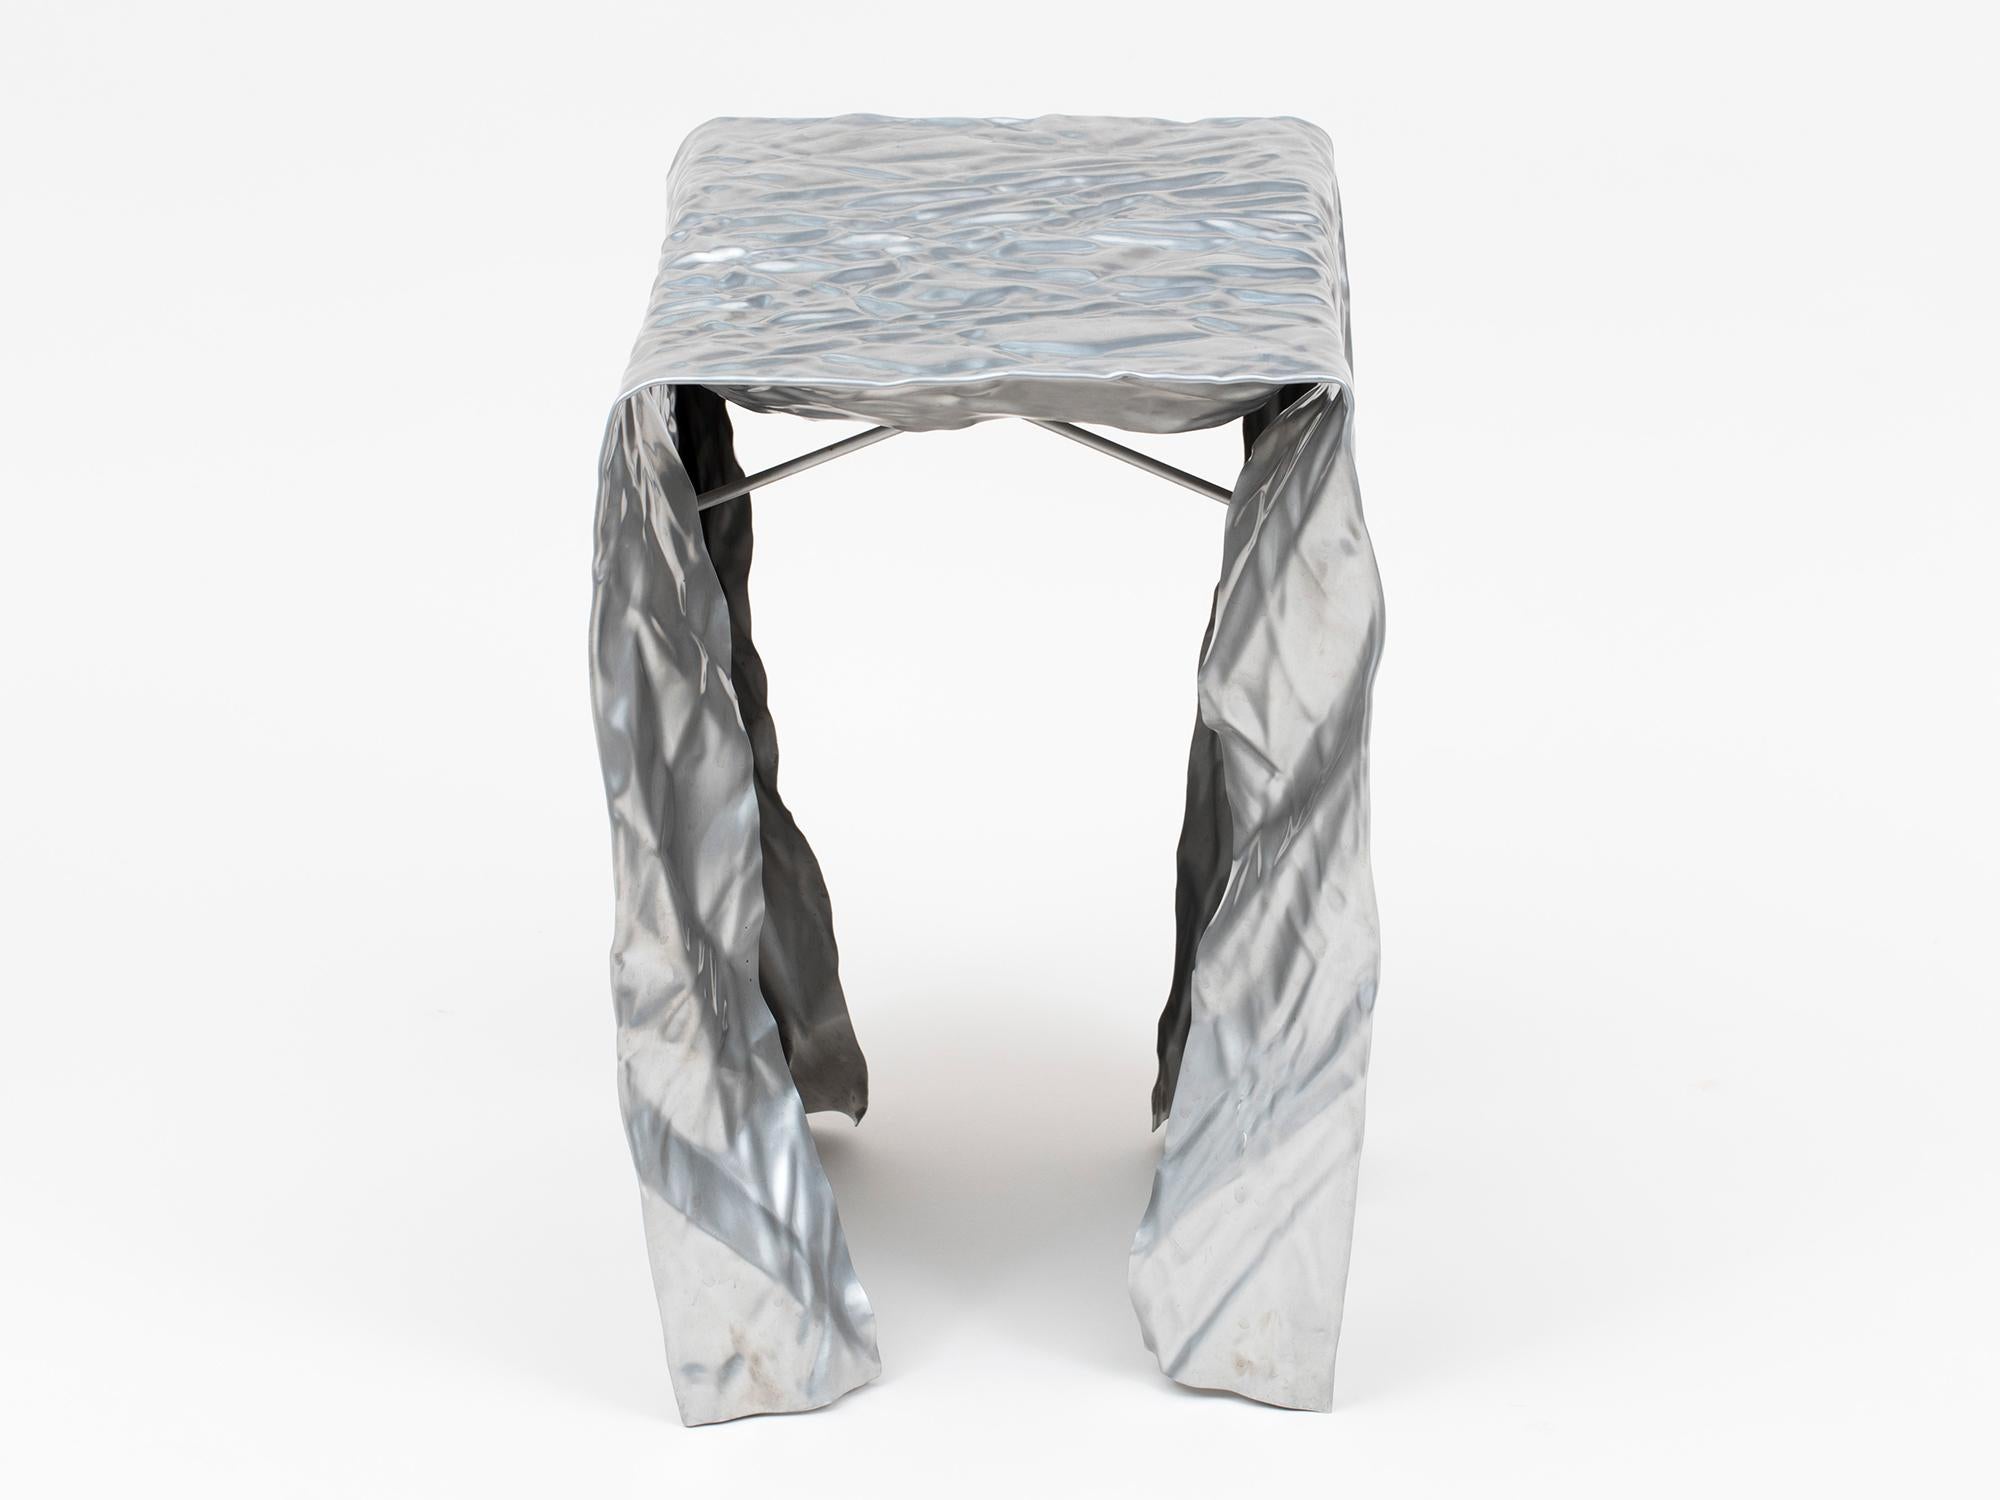 Wrinkled brushed stainless steel stool by Omaha-based designer Christopher Prinz. Can be used indoors or outside. Made to order with a lead time estimate of 6-8 weeks. Available in a range of raw and polished finishes. Please note that pieces with